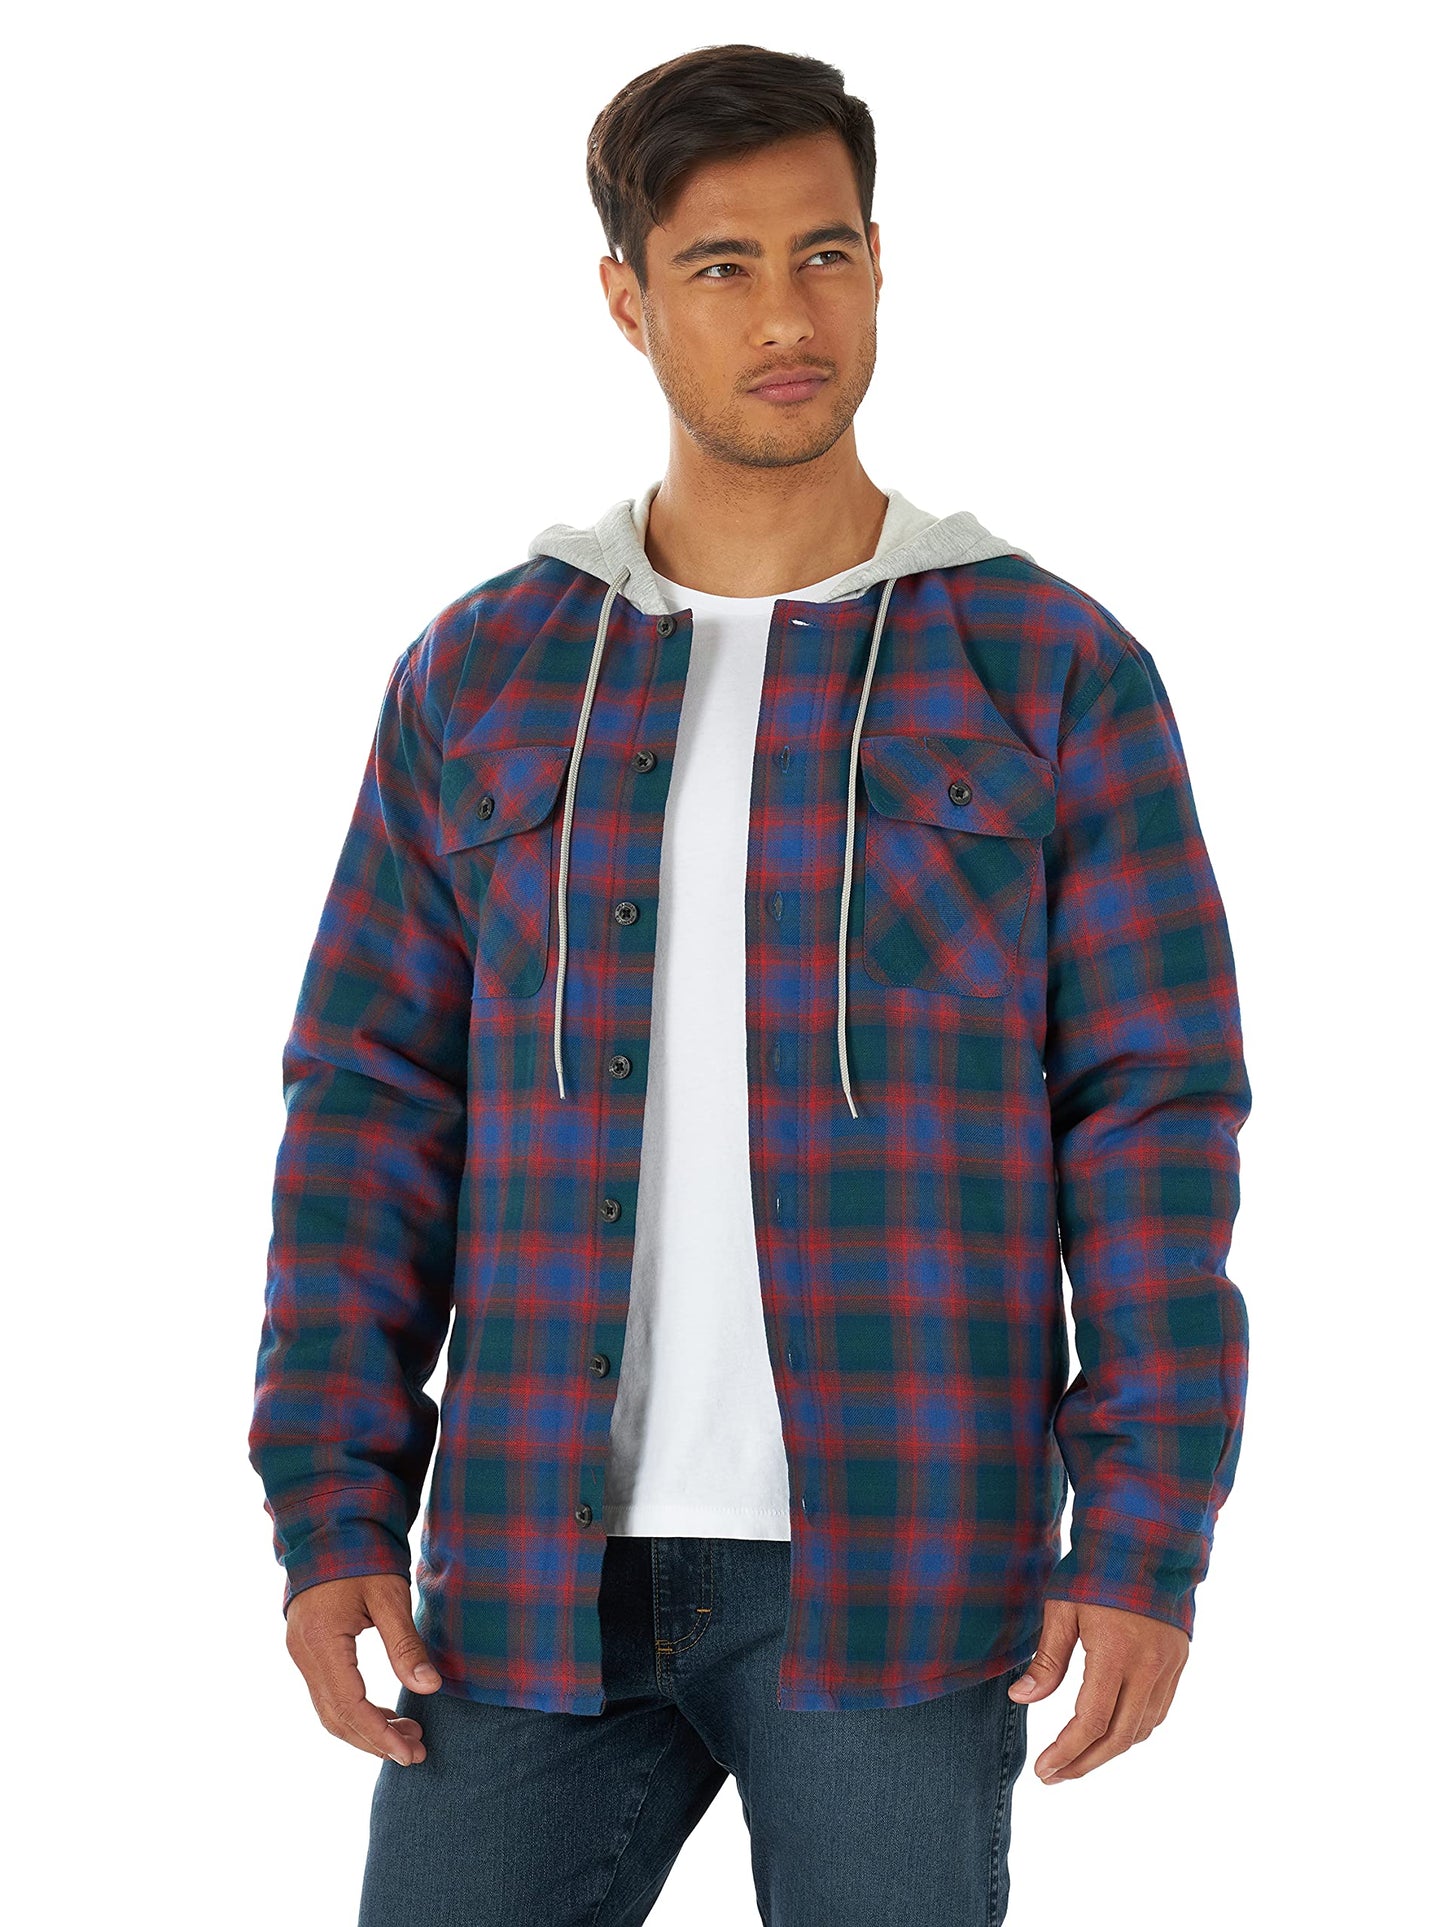 Wrangler Authentics Men's Long Sleeve Quilted Lined Flannel Shirt Jacket with Hood, Blue/Red, Medium